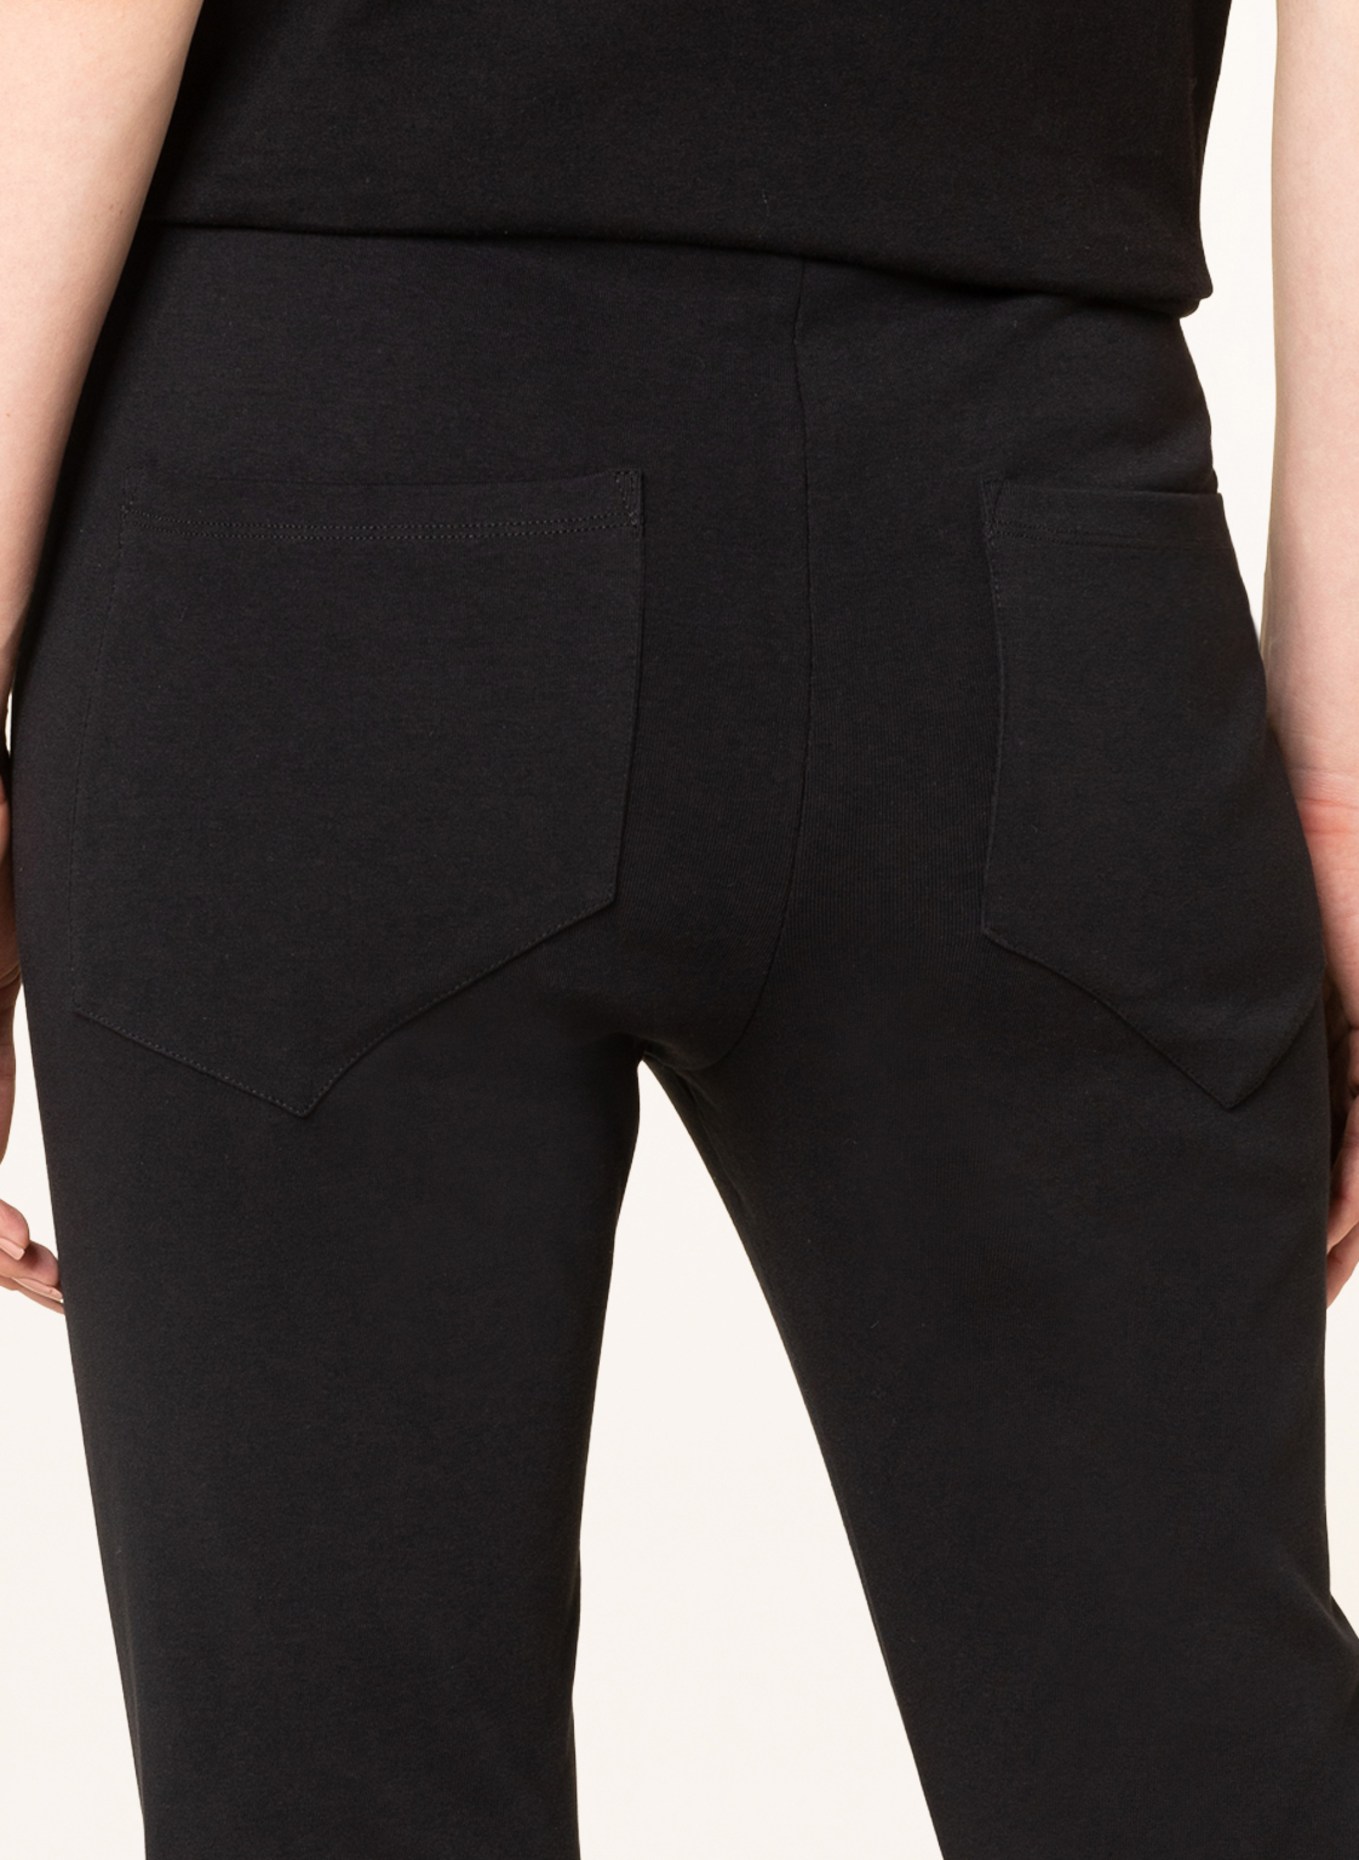 10DAYS Trousers in jogger style, Color: BLACK (Image 5)